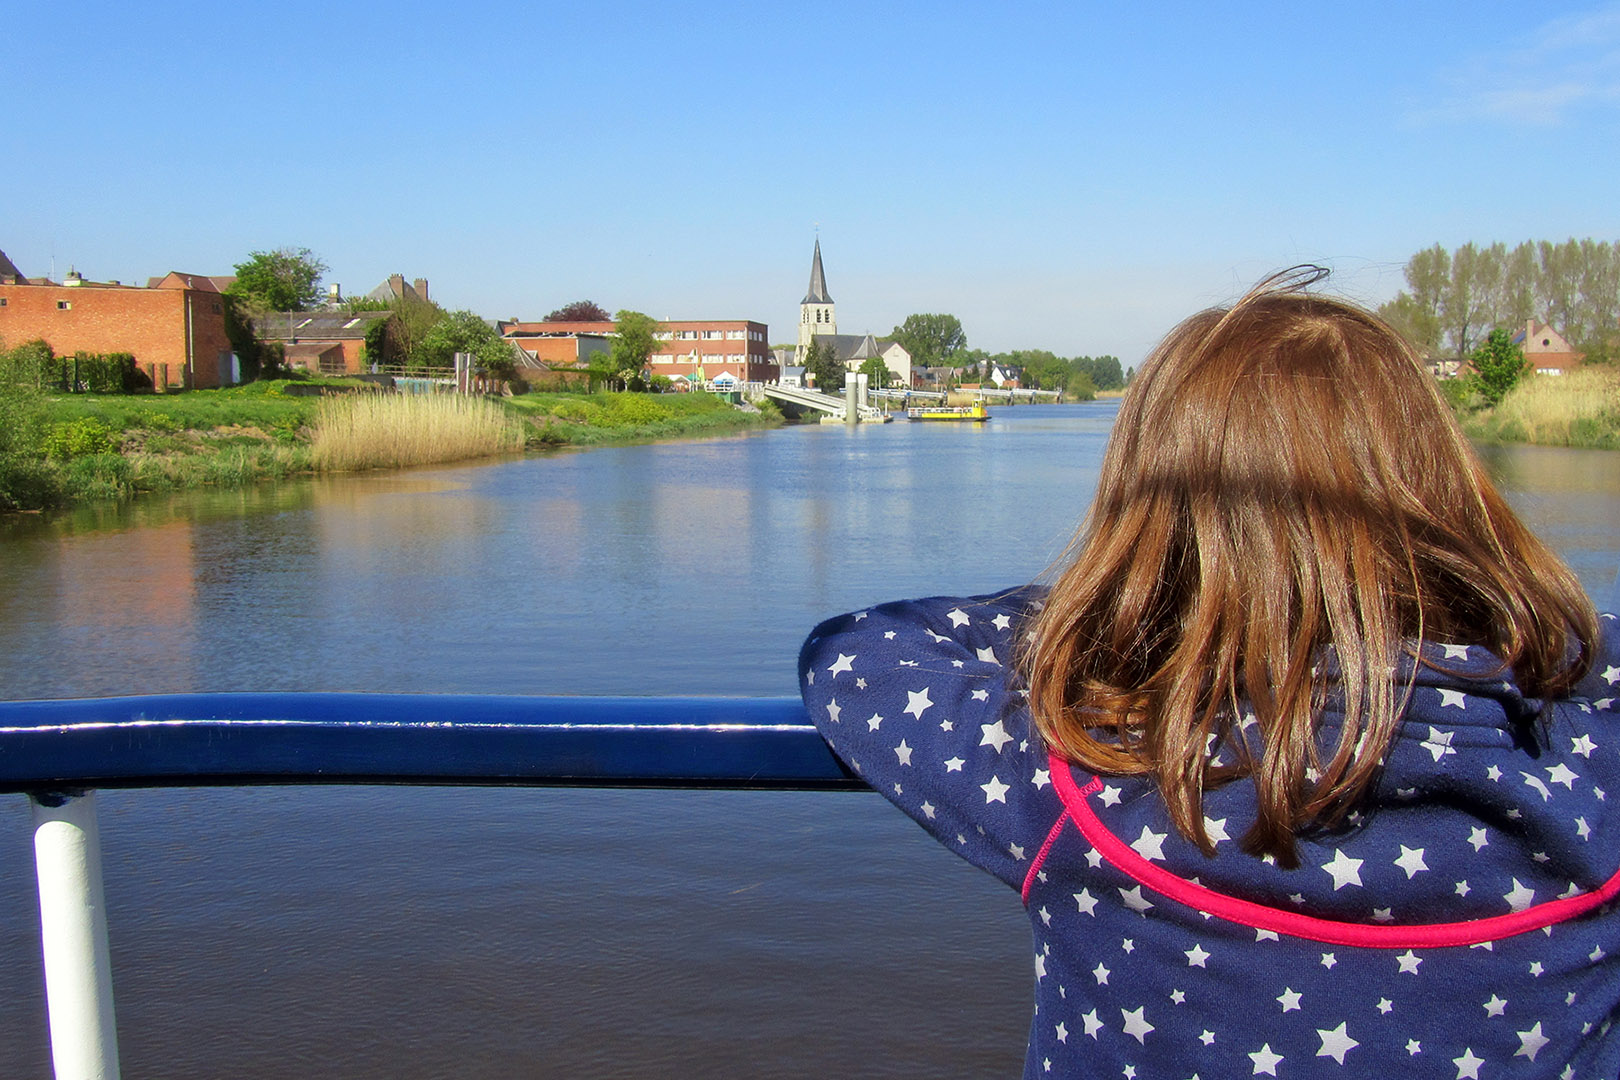 fotoreeks Discover the Scheldeland by boat with visits to Rupelmonde and Sint-Amands, departing from Schellebelle or Dendermonde.